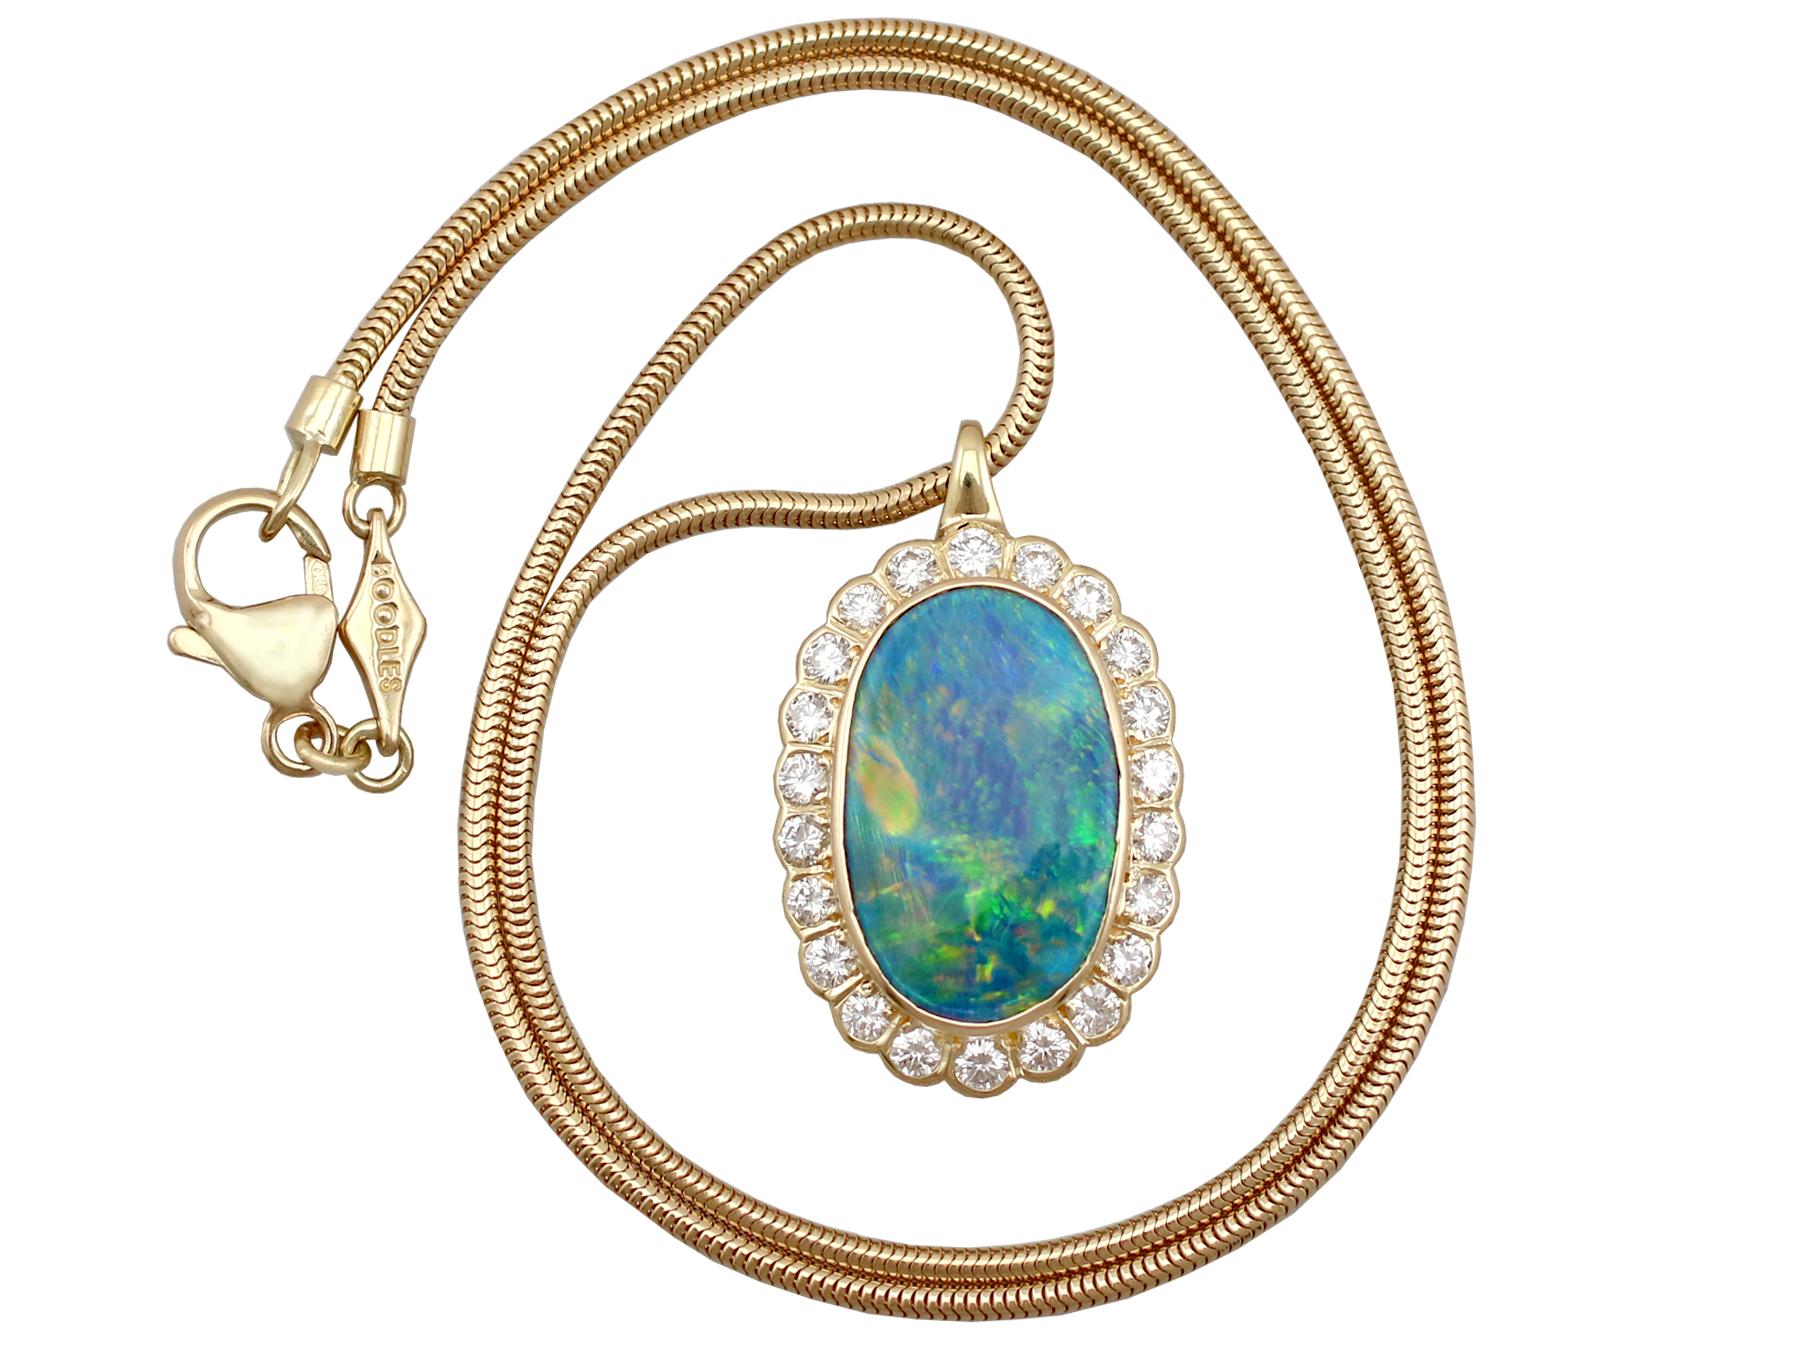 A stunning vintage 1980's 4.39 carat opal and 1.10 carat diamond, 18 karat yellow gold pendant and chain by Boodles; part of our diverse jewellery collections.

This stunning, fine and impressive vintage opal pendant has been crafted in 18k yellow